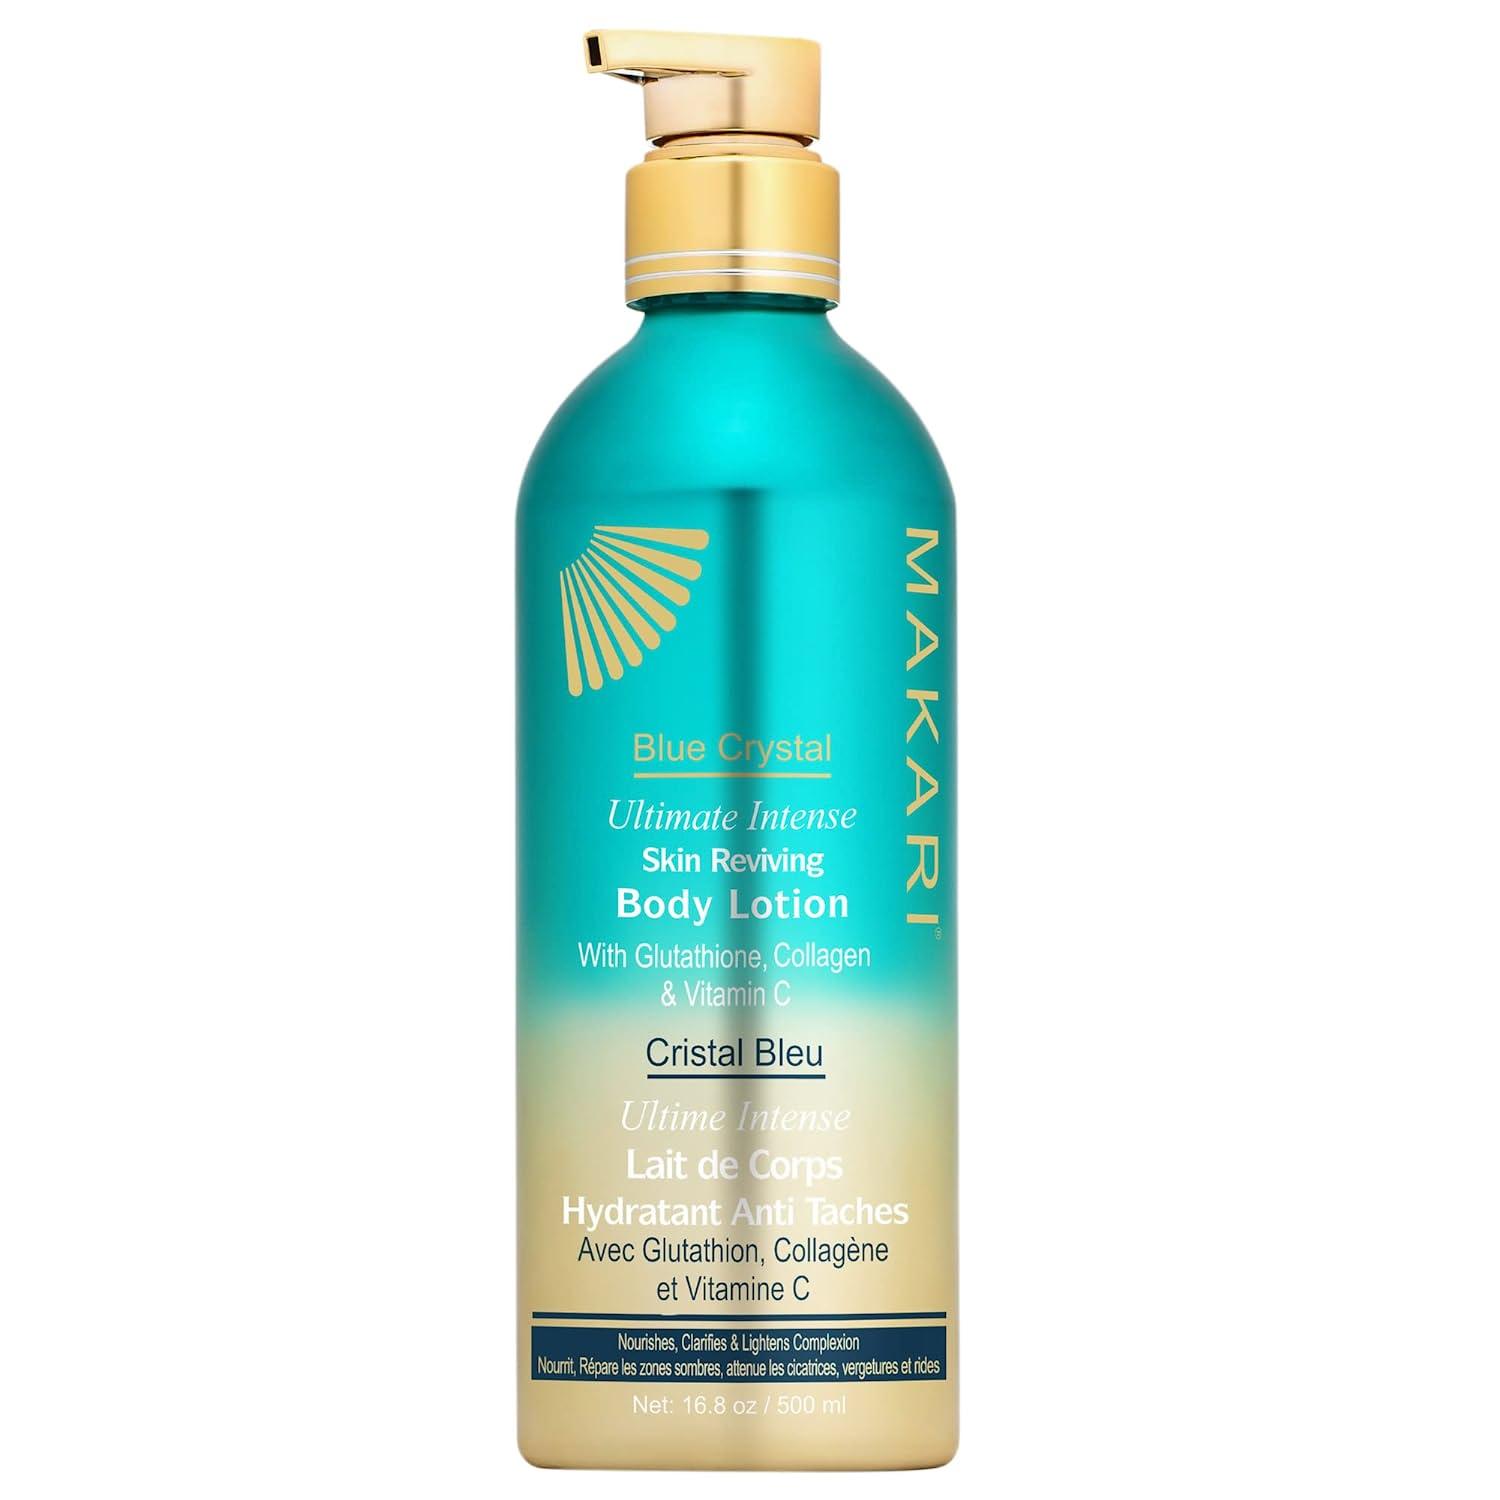 shop Makari Ultimate Intense Blue Crystal Skin Reviving Body Lotion from HealthPlus online pharmacy in Nigeria